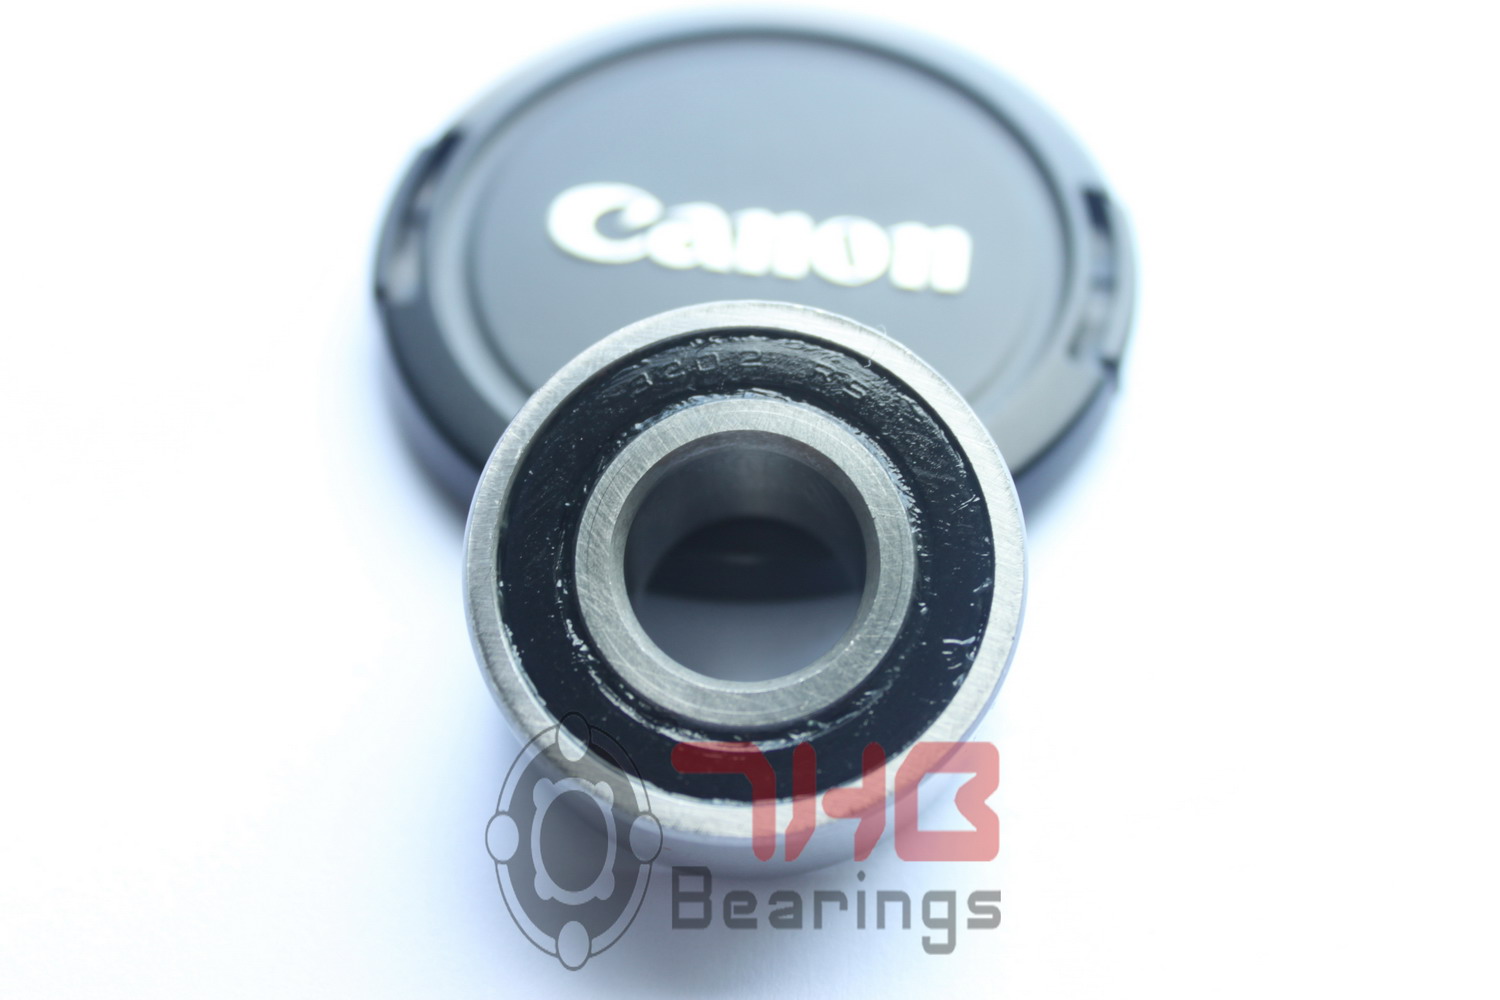 3202A 2RSTN double row angular contact ball bearings with se